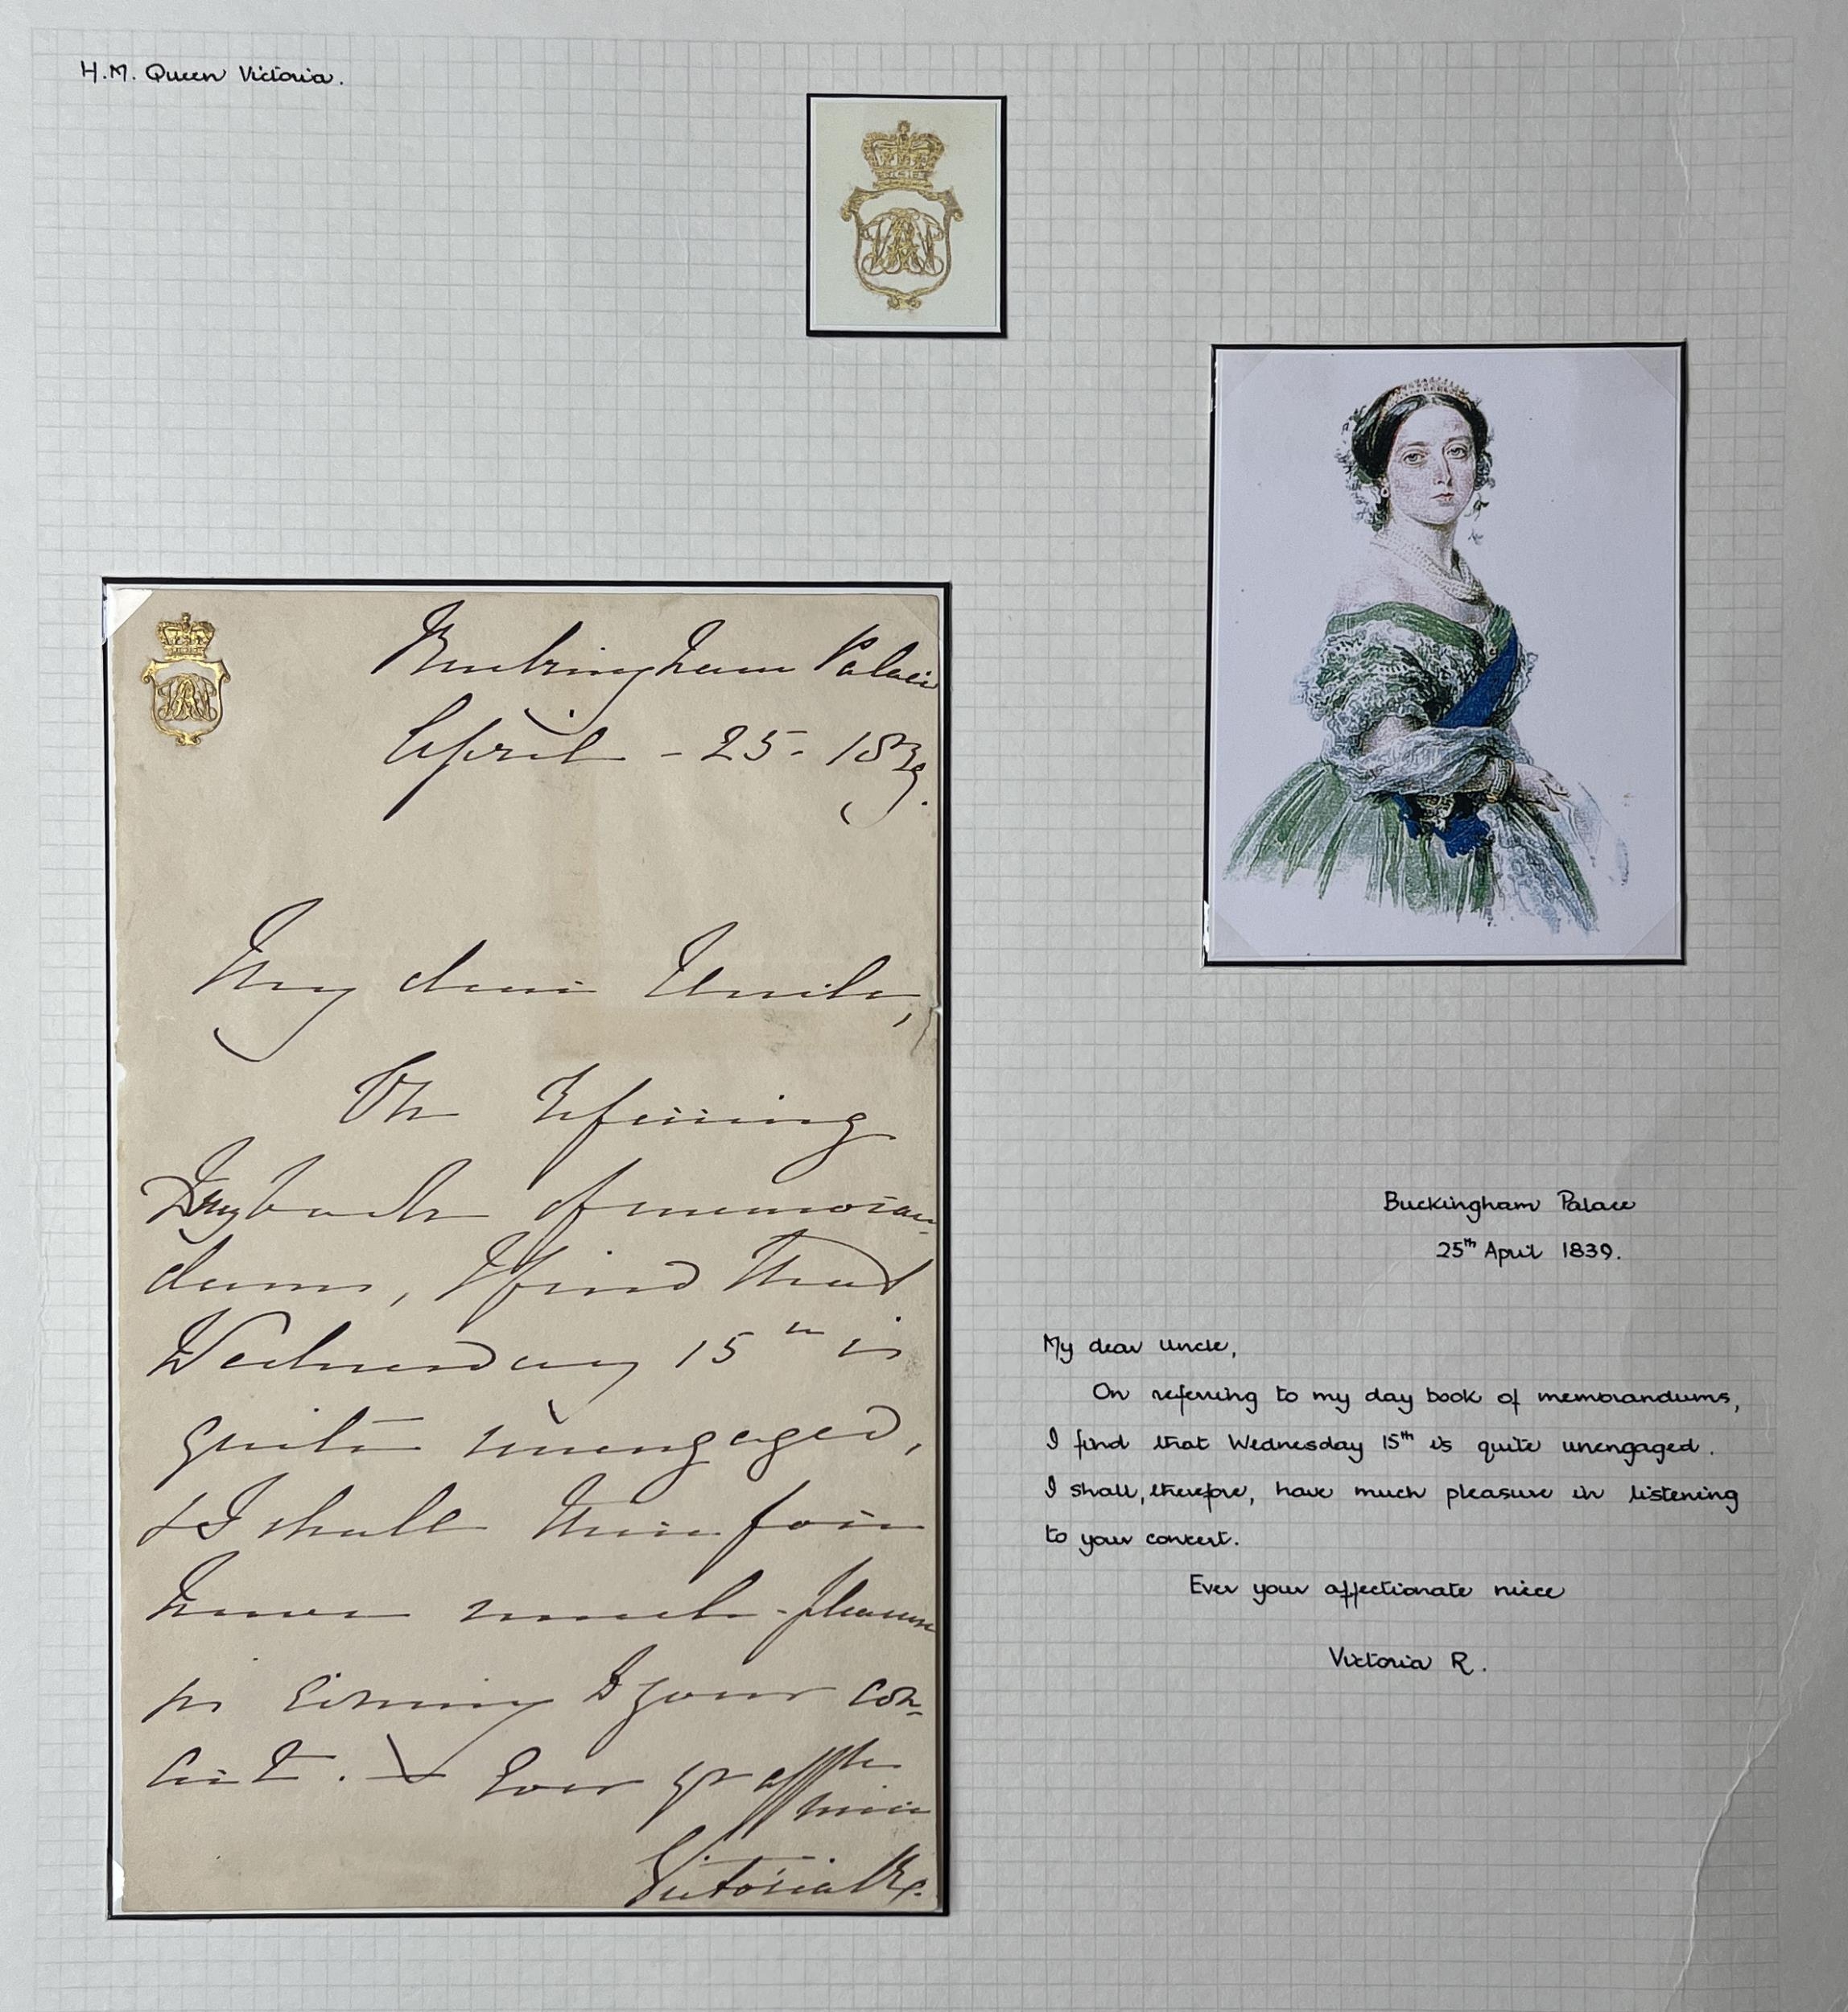 1839 handwritten letter by Queen Victoria, from Buckingham Palace 25 April  1839 to her Uncle, in goo